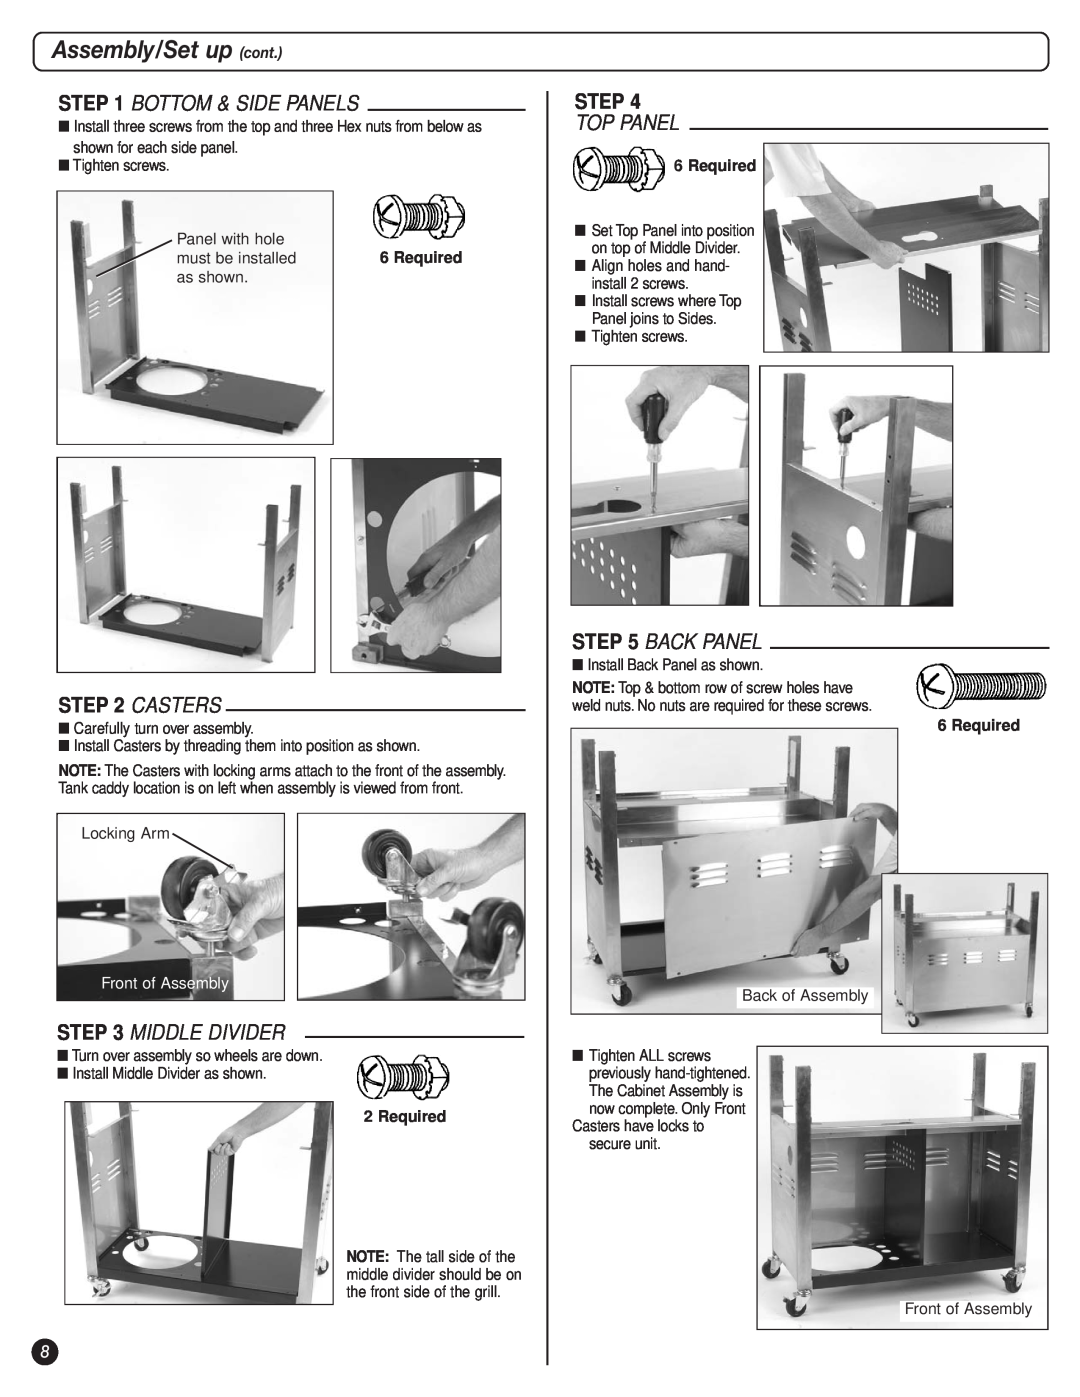 Coleman 9947A726 manual Assembly/Set up cont, Bottom & Side Panels, Casters, Middle Divider, Step, Top Panel, Back Panel 